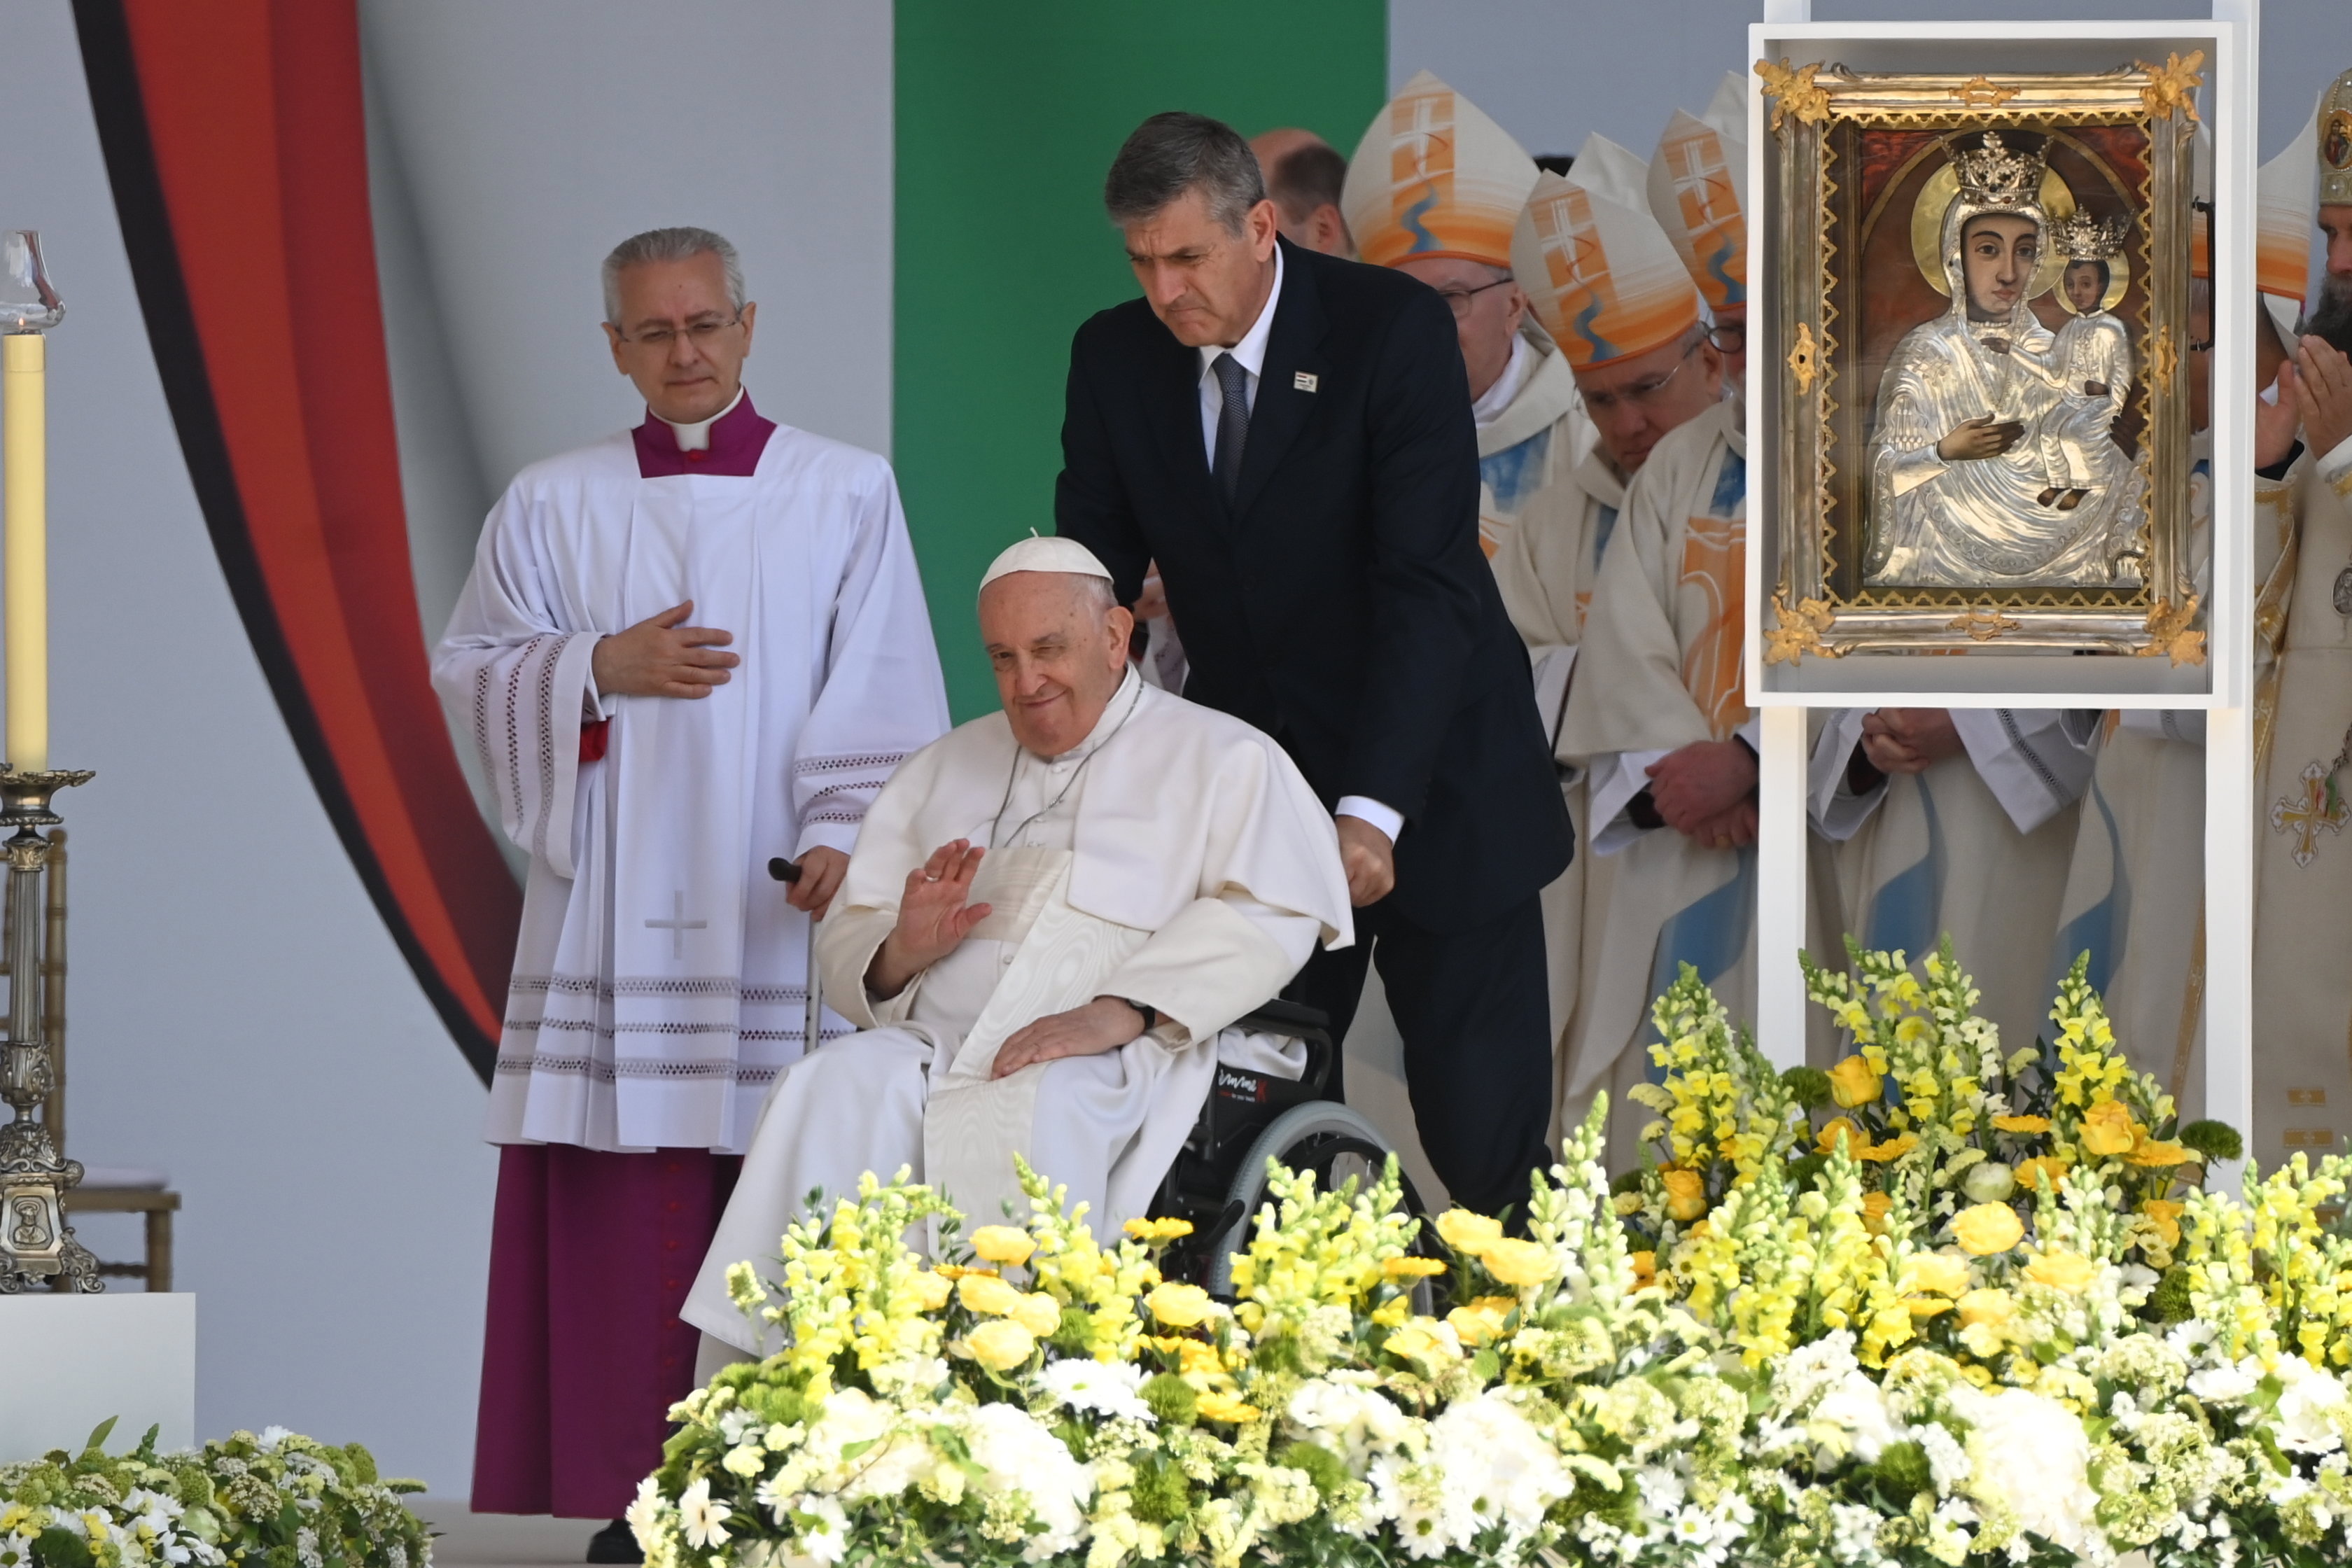 Photos: Summary of Pope's Visit to Hungary - Part 2